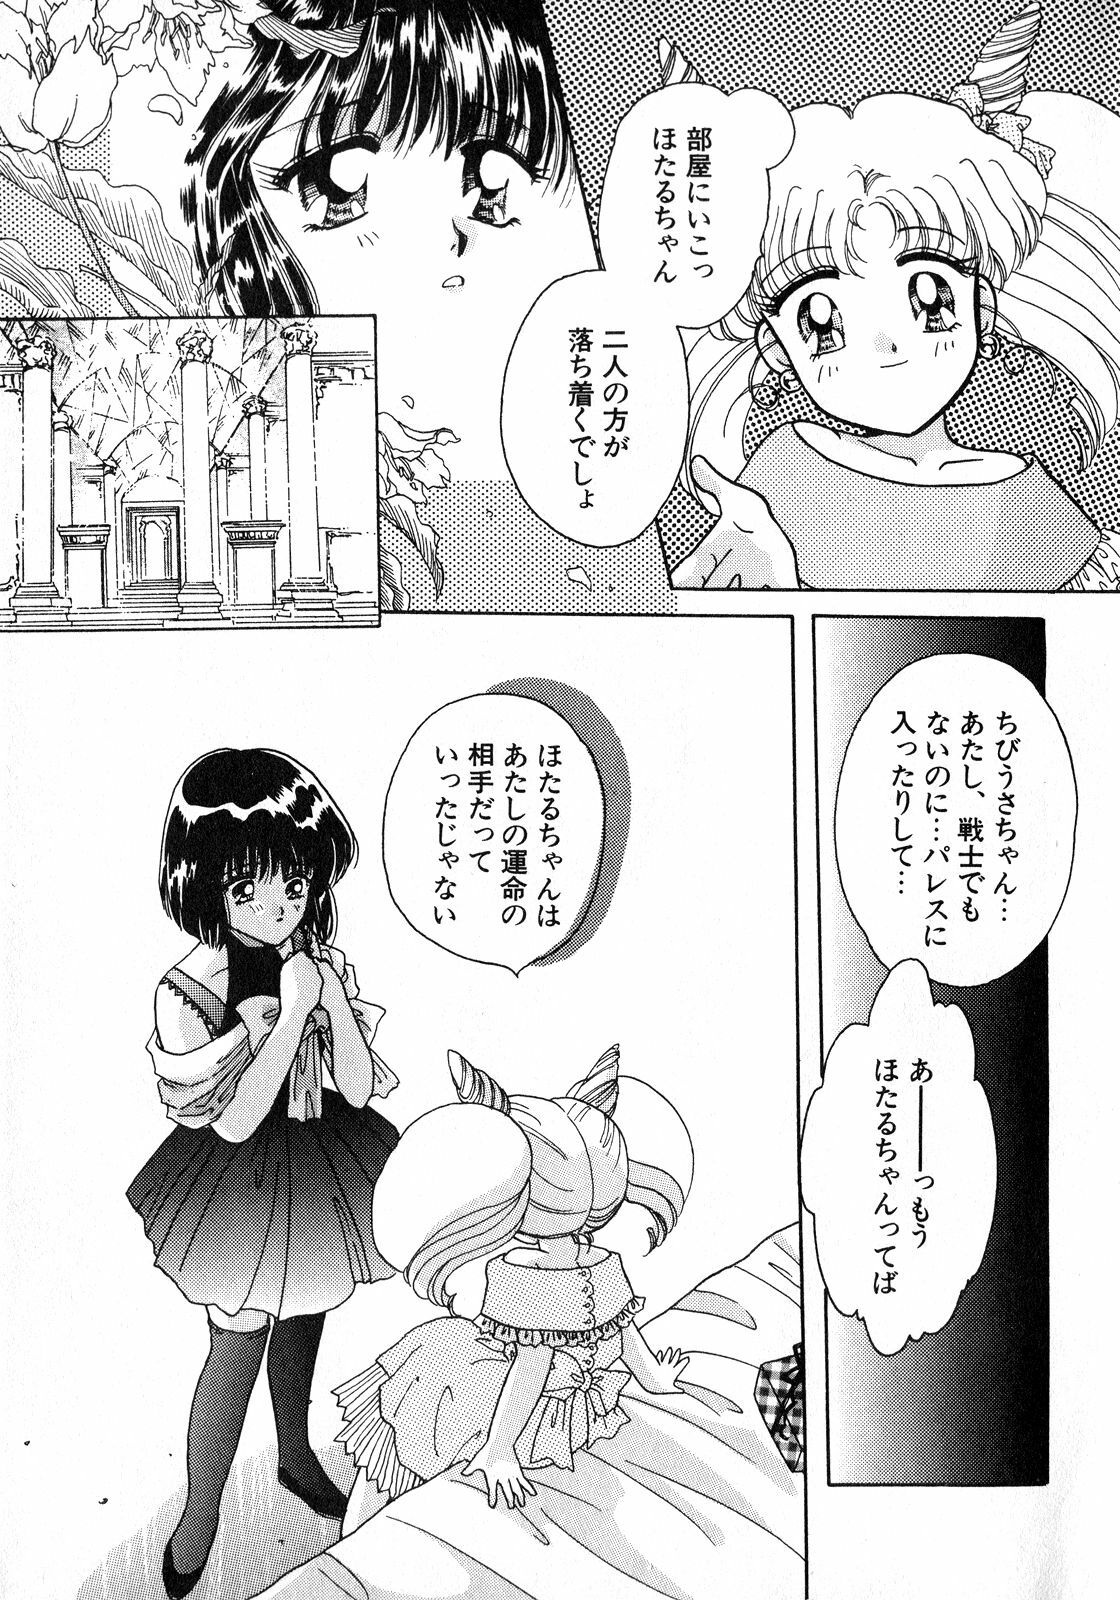 [Anthology] Lunatic Party 8 (Sailor Moon) page 6 full